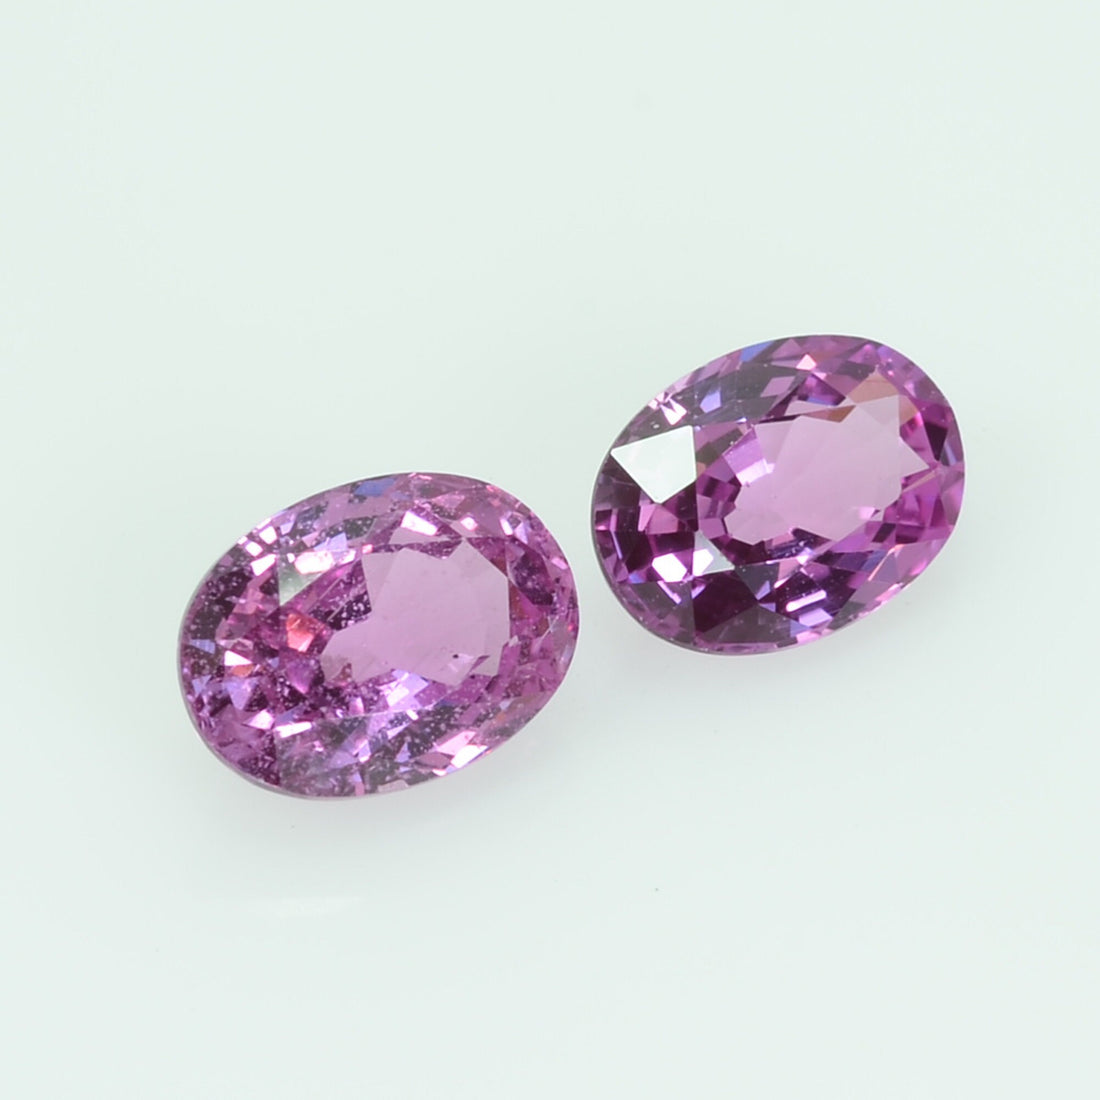 2.06 cts Natural Pink Sapphire Loose Gemstone oval Cut